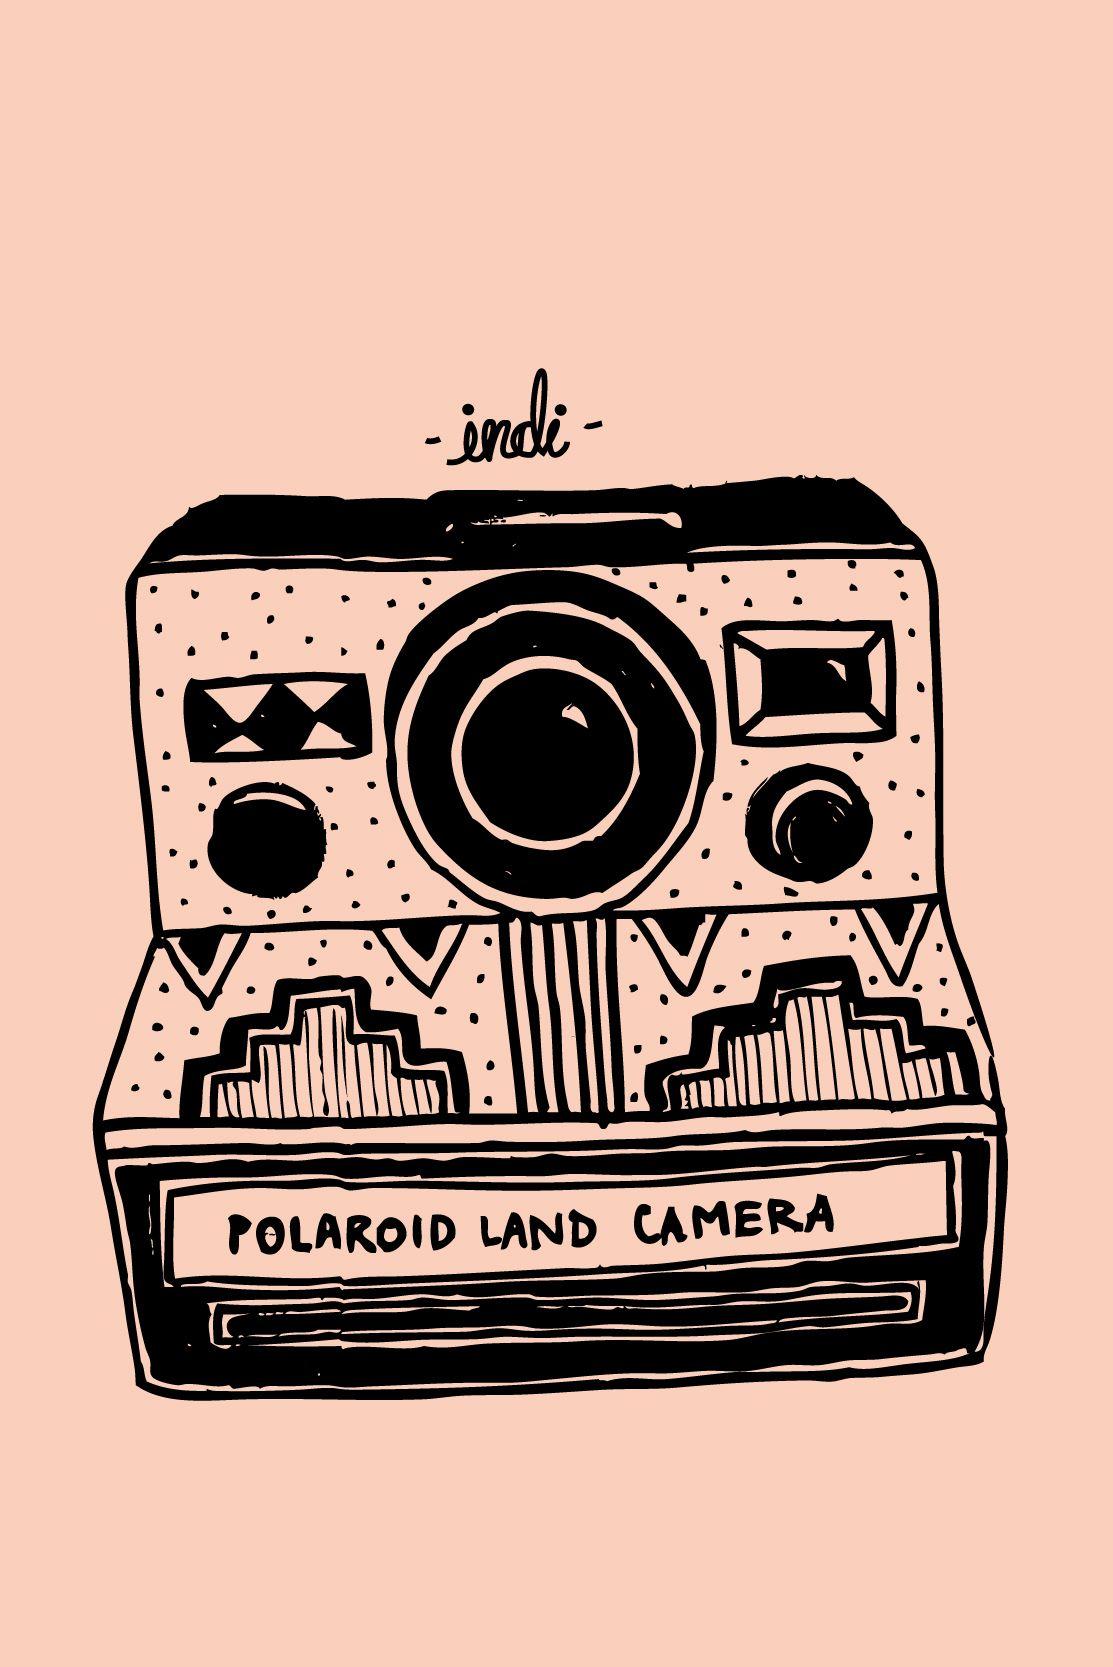 VINTAGE CAMERAS (wallpaper for iPhone or iPod)